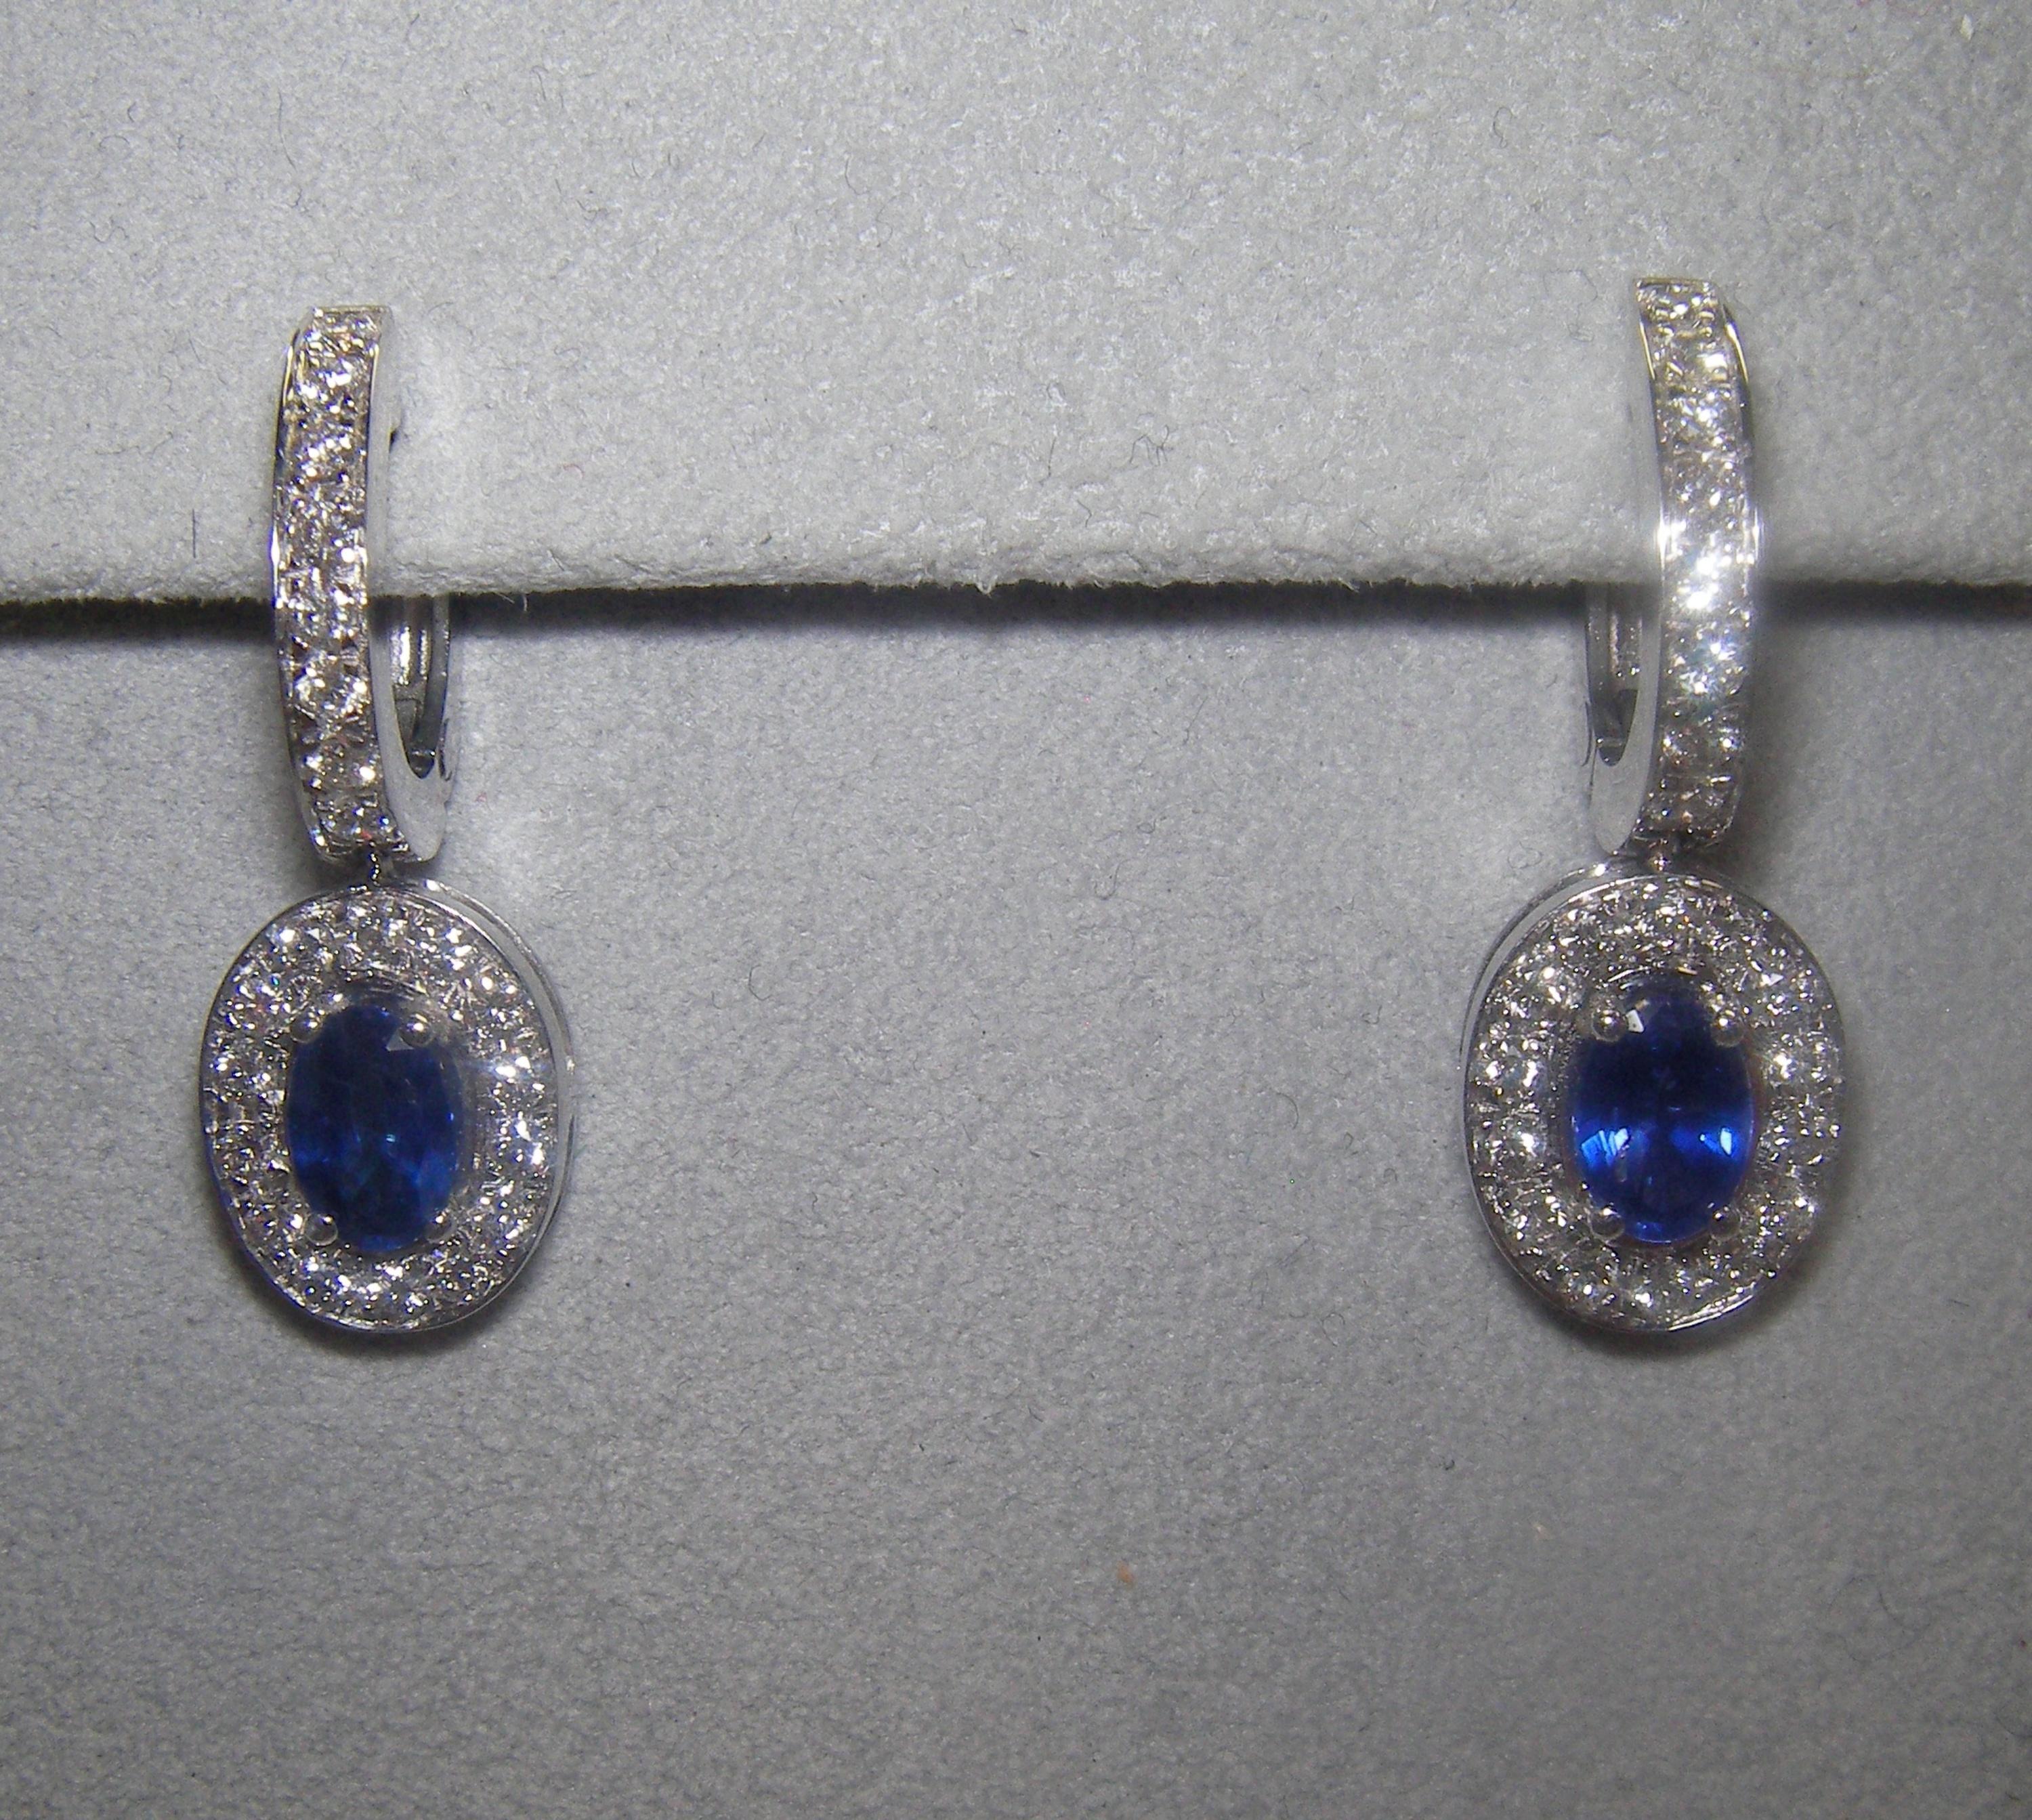 18 Karat White Gold Diamond and Sapphire Dangle Earrings

44  Diamonds 0.70 Carat H SI
2  Sapphires  1,59 Carat


Founded in 1974, Gianni Lazzaro is a family-owned jewelry company based out of Düsseldorf, Germany.
Although rooted in Germany, Gianni